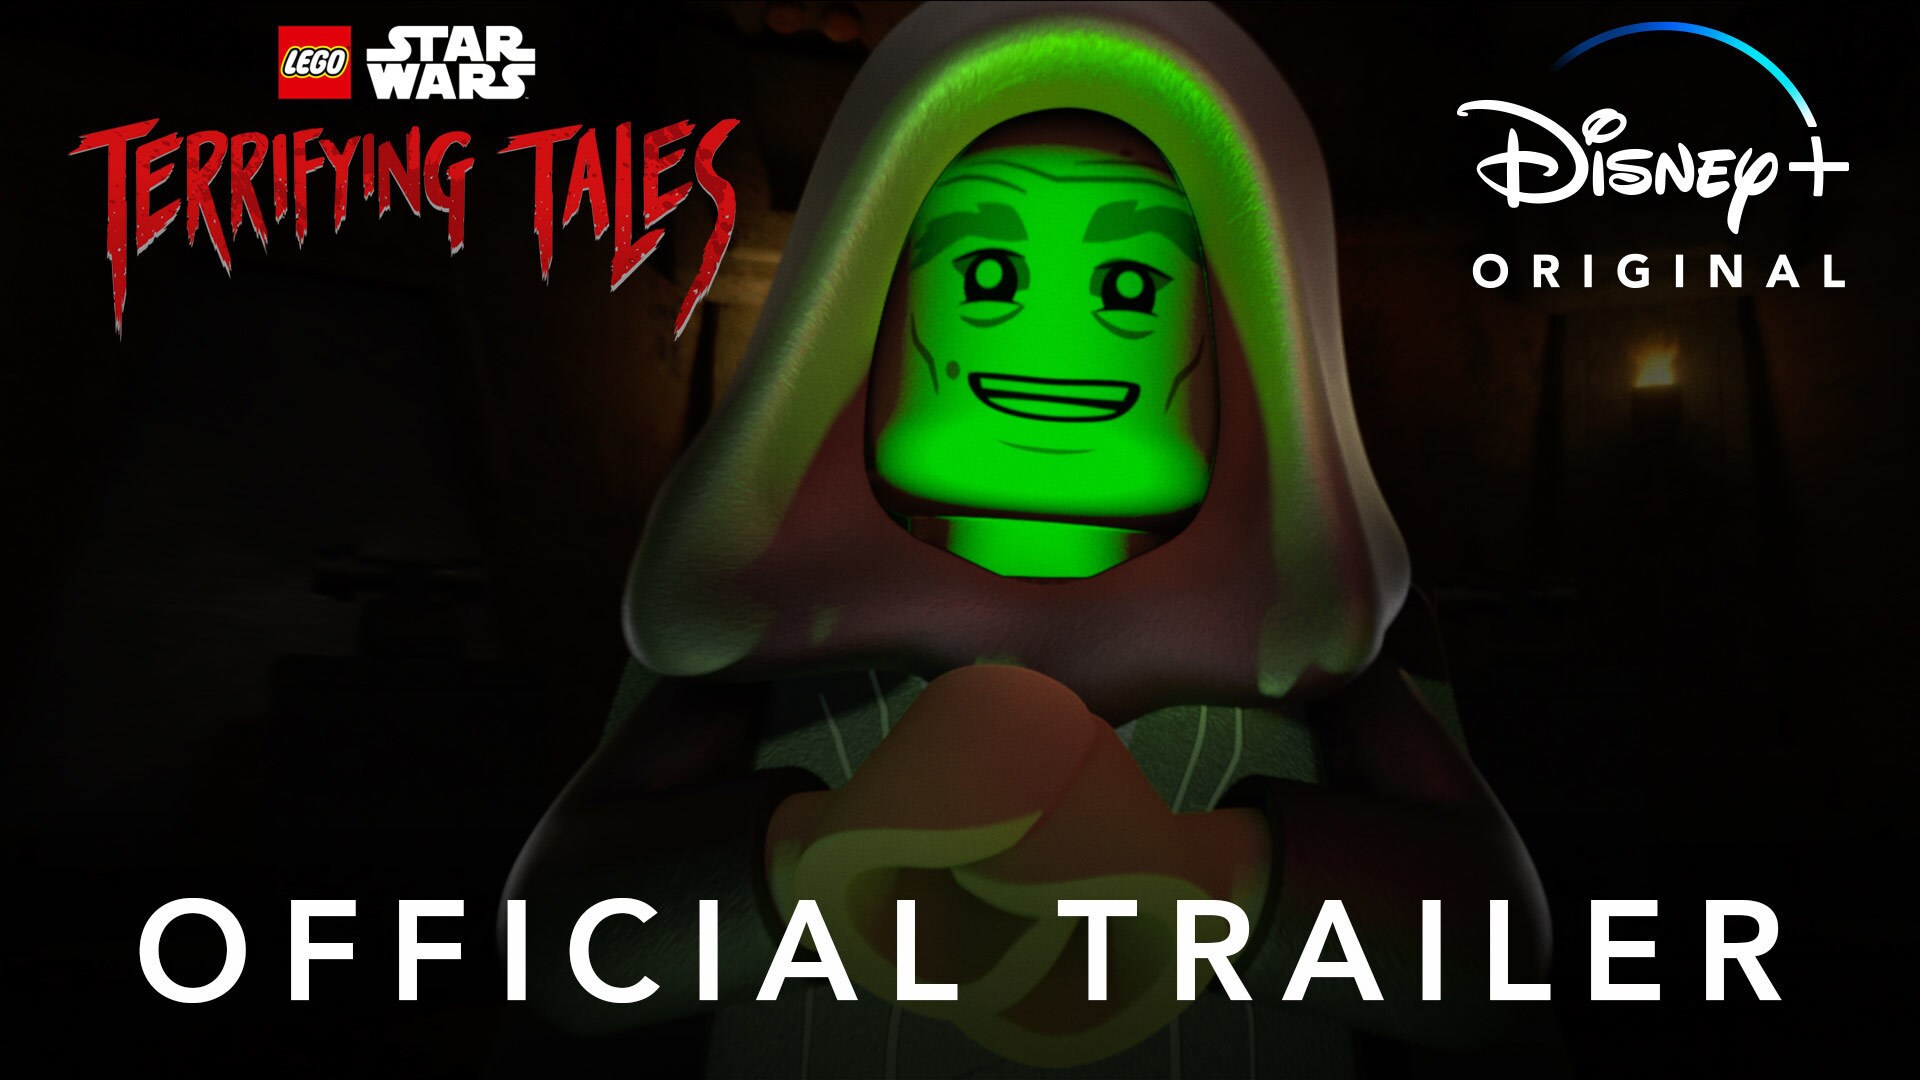 Official Trailer - LEGO Star Wars Terrifying Tales